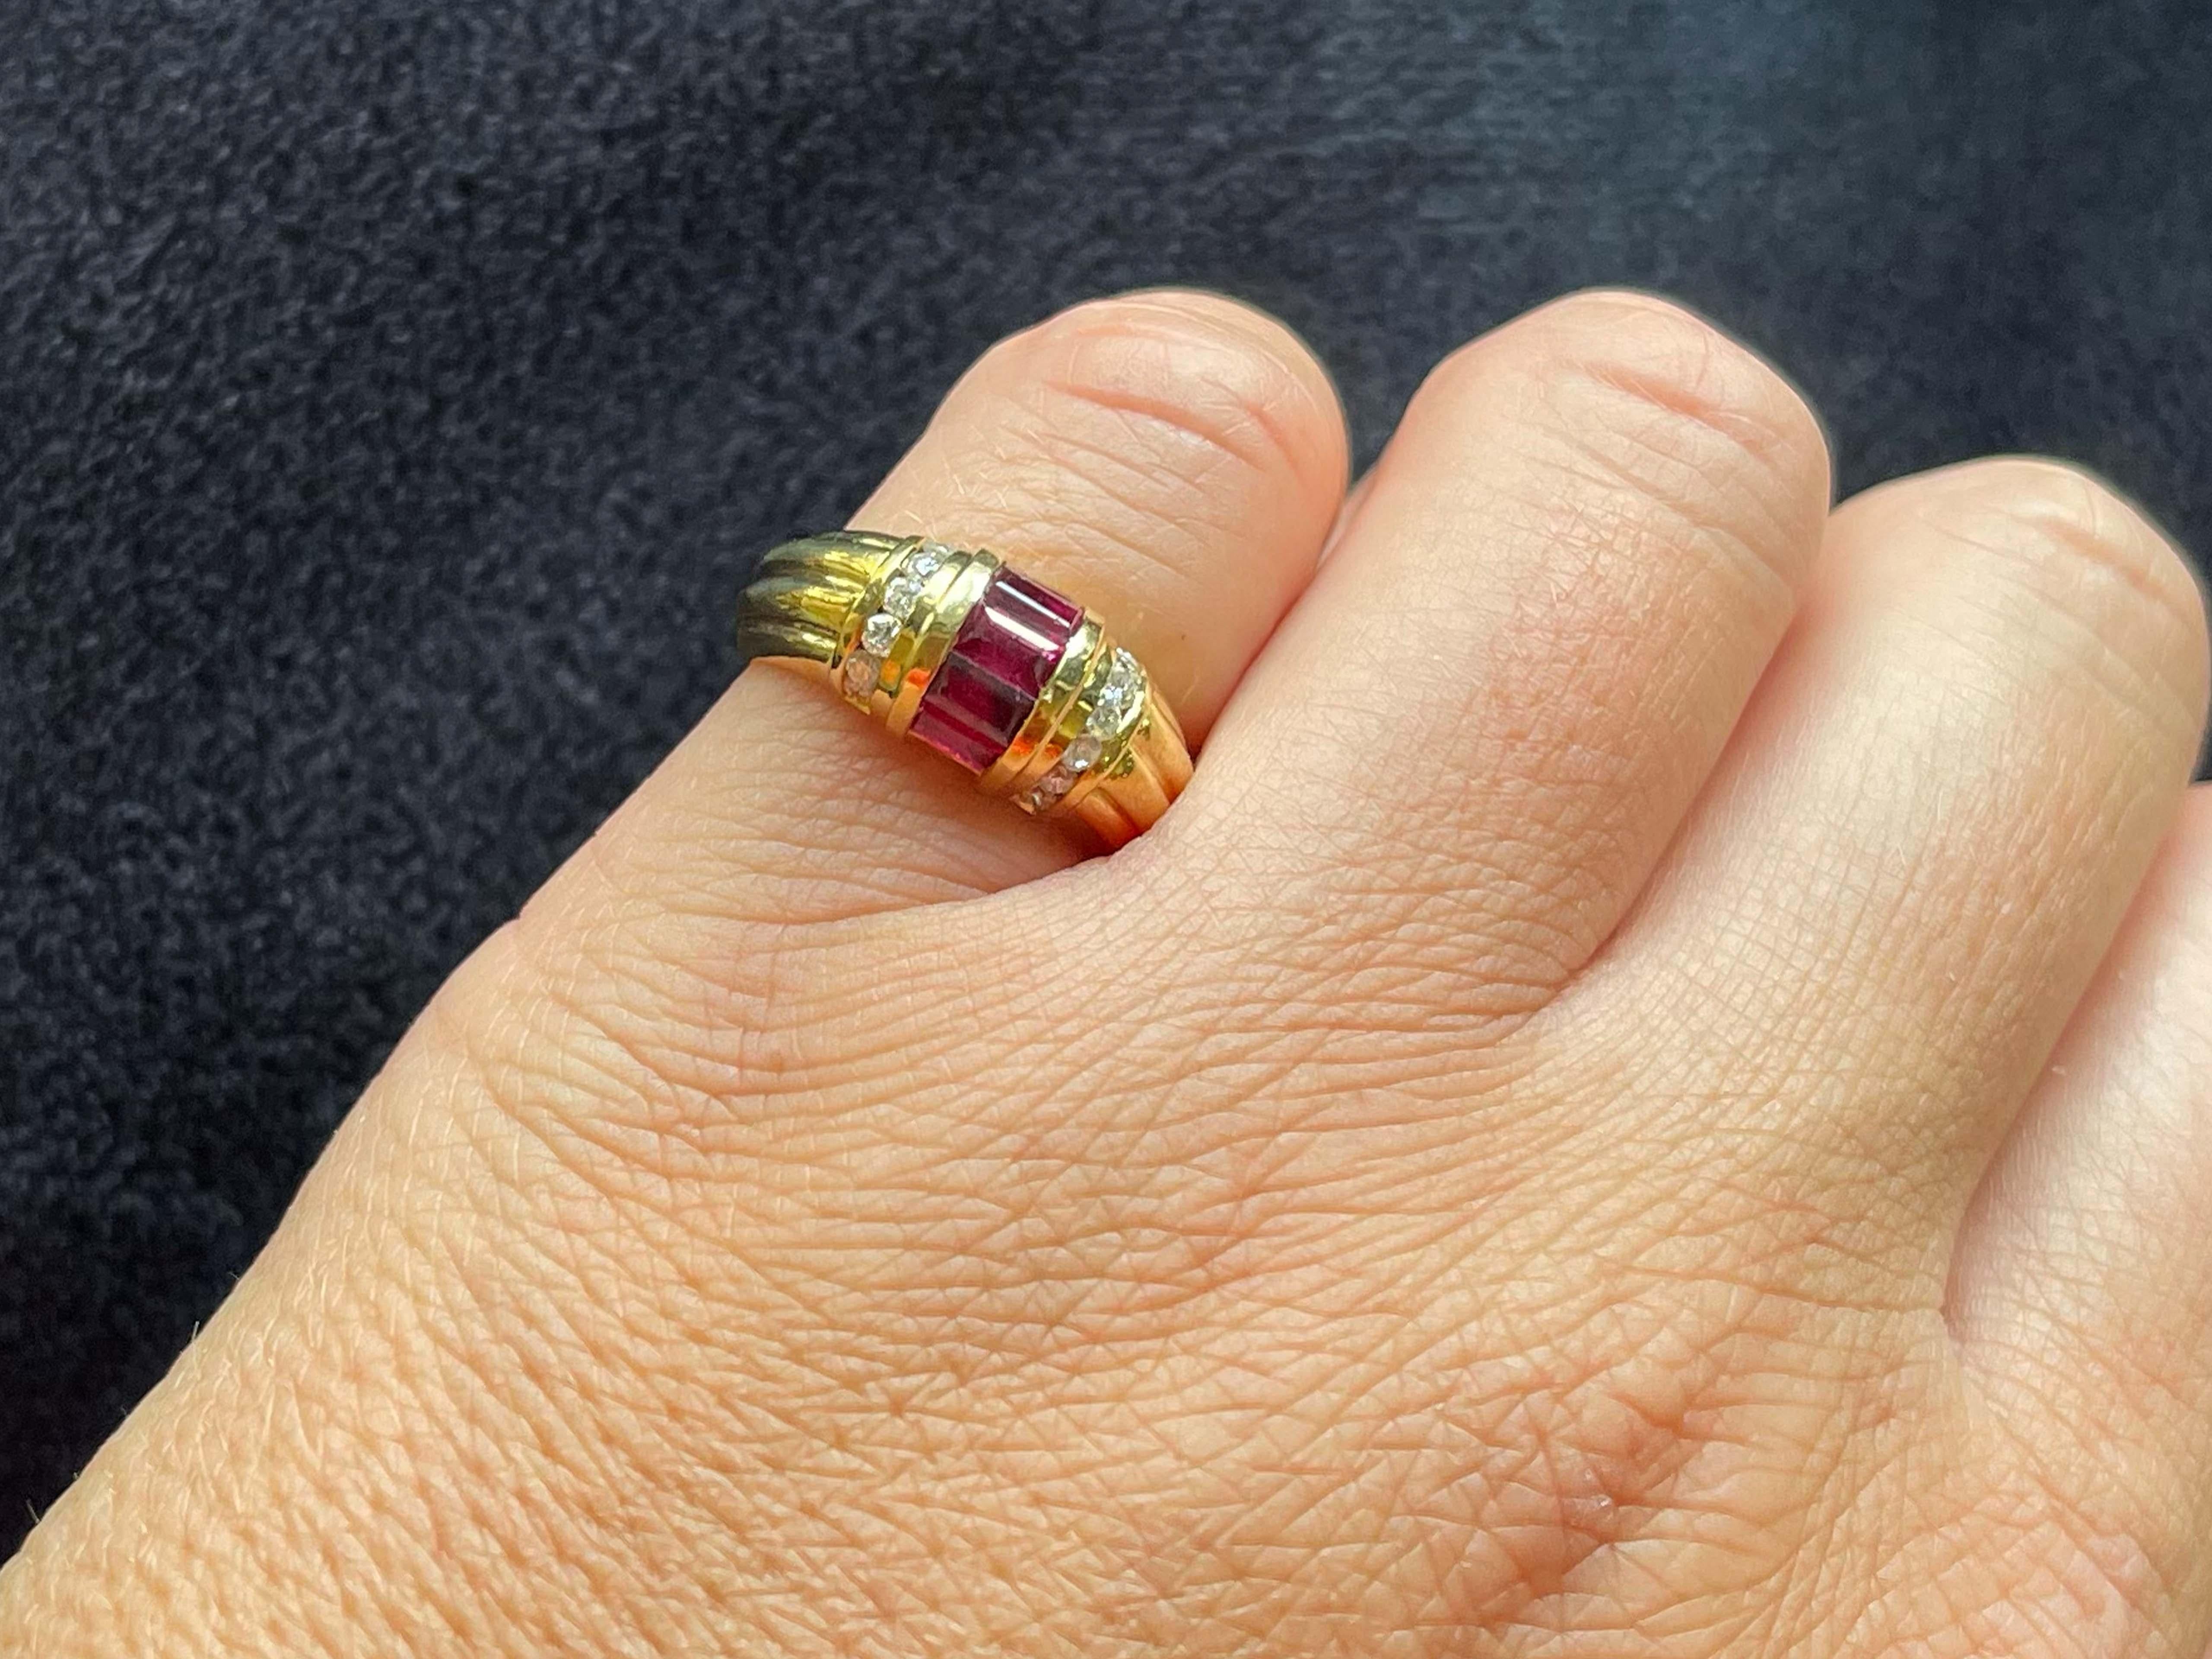 Item Specifications:

Metal: 18K Yellow Gold

Style: Statement Ring

Ring Size: 5.5 (resizing available for a fee)

Total Weight: 6.2 Grams

Gemstone Specifications:

Gemstones: 5 red rubies

Ruby Carat Weight: 1.34 carats

Diamond Carat Weight: